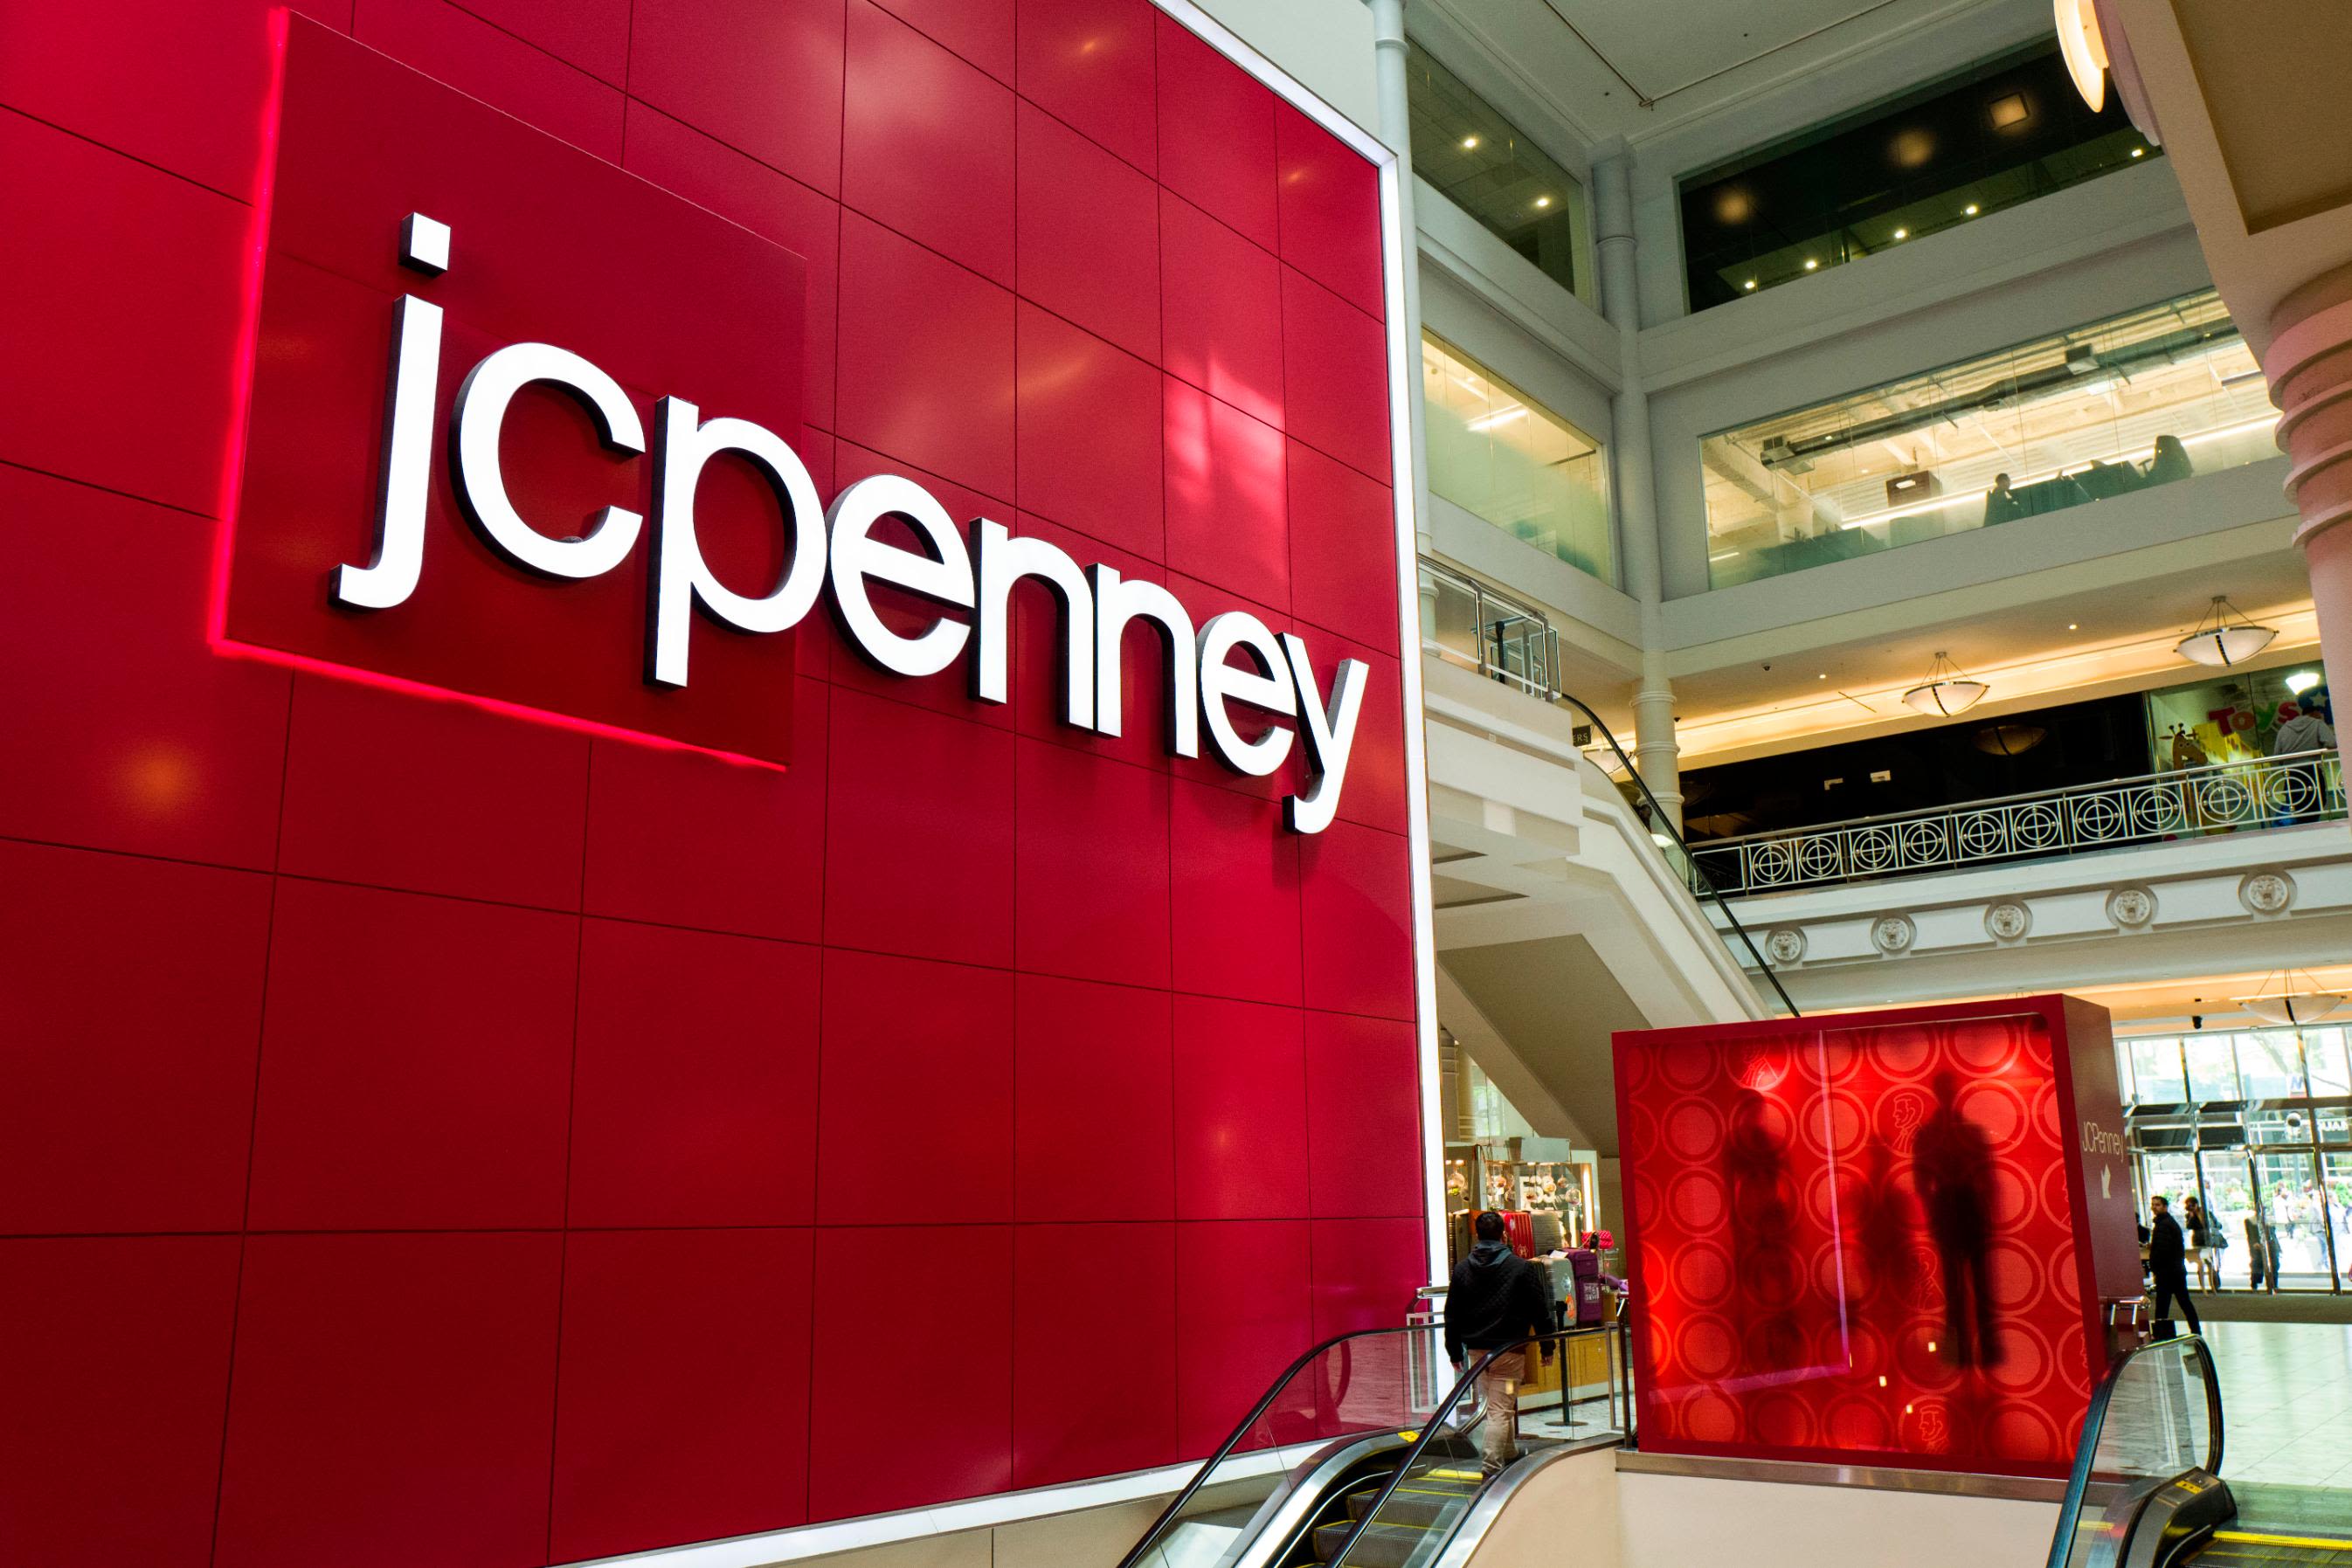 J.C. Penney goes private (label) in fight to continue turnaround